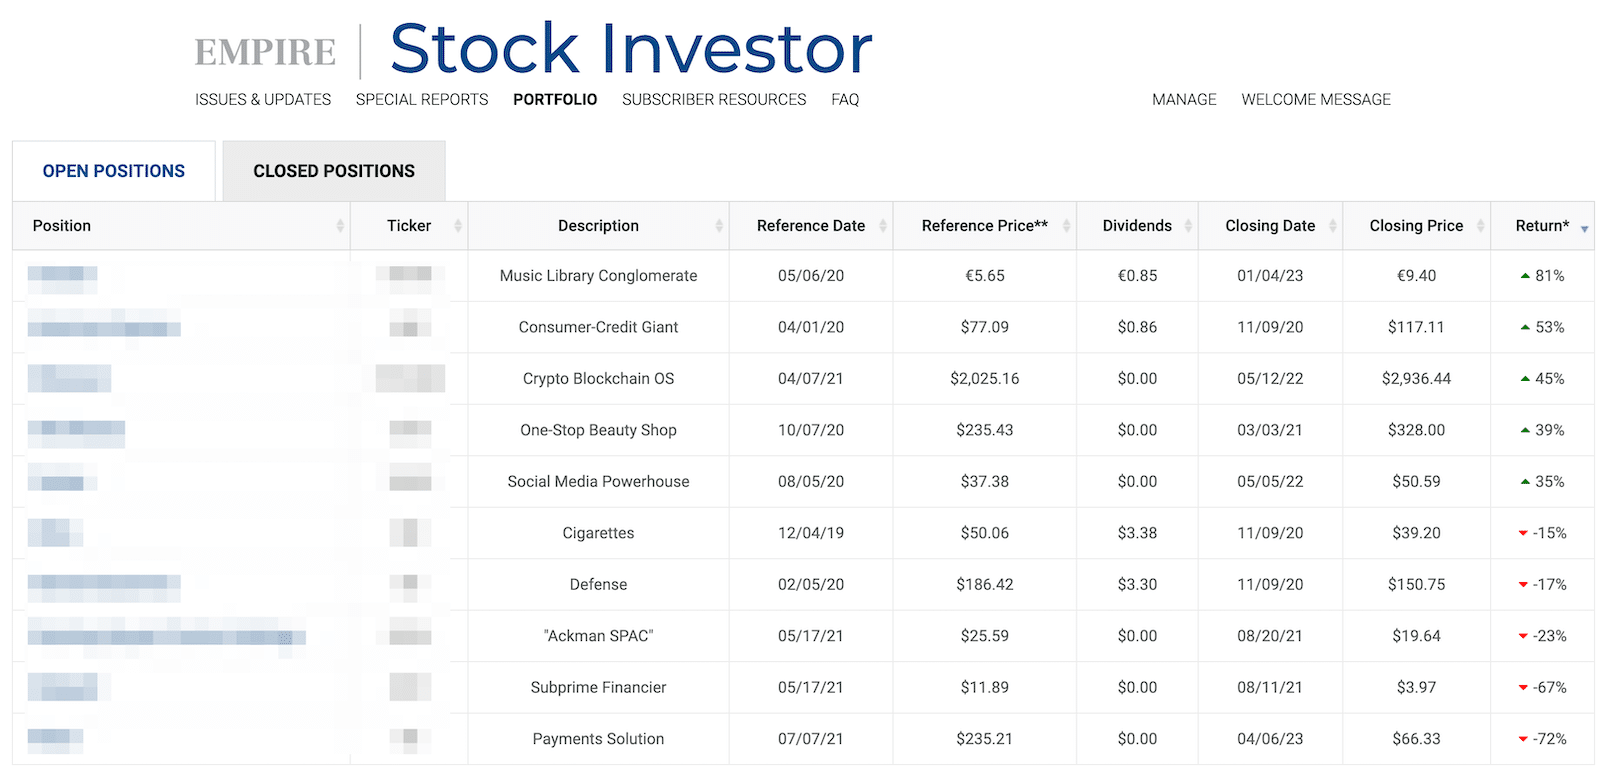 An April 2023 update of the Empire Stock Investor model portfolio (closed positions).